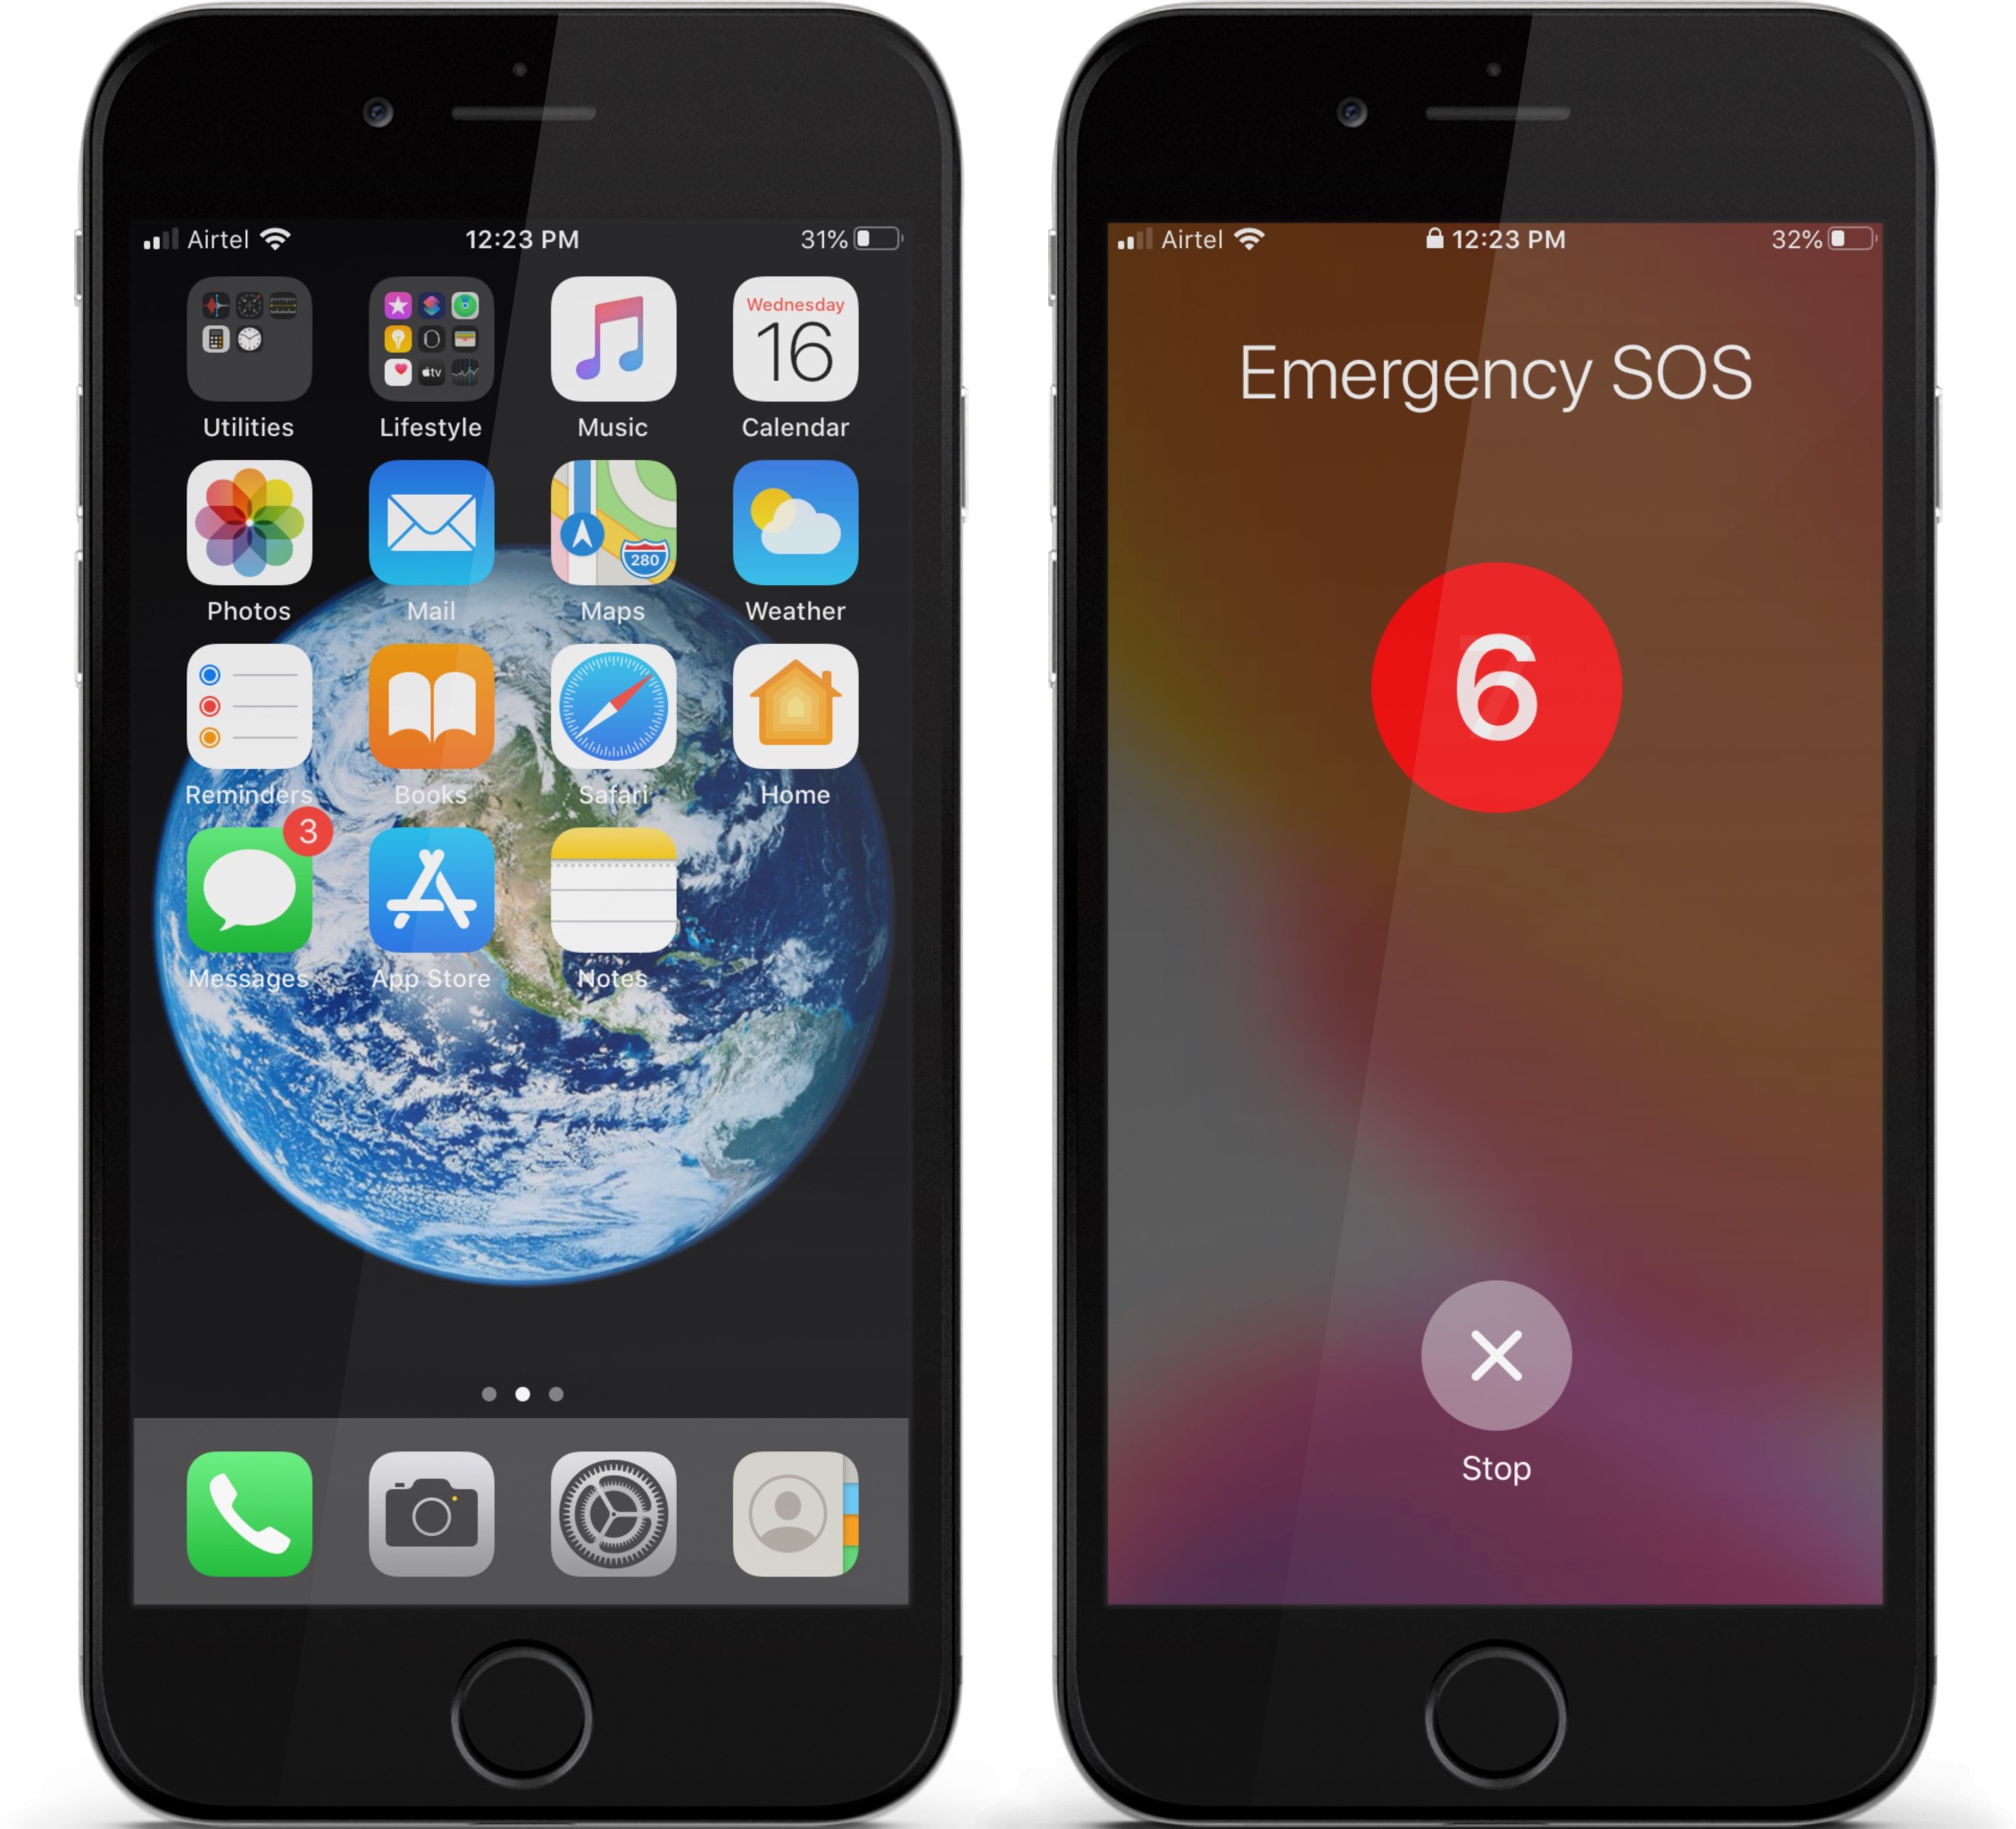 count down start to make emergency call on iphone